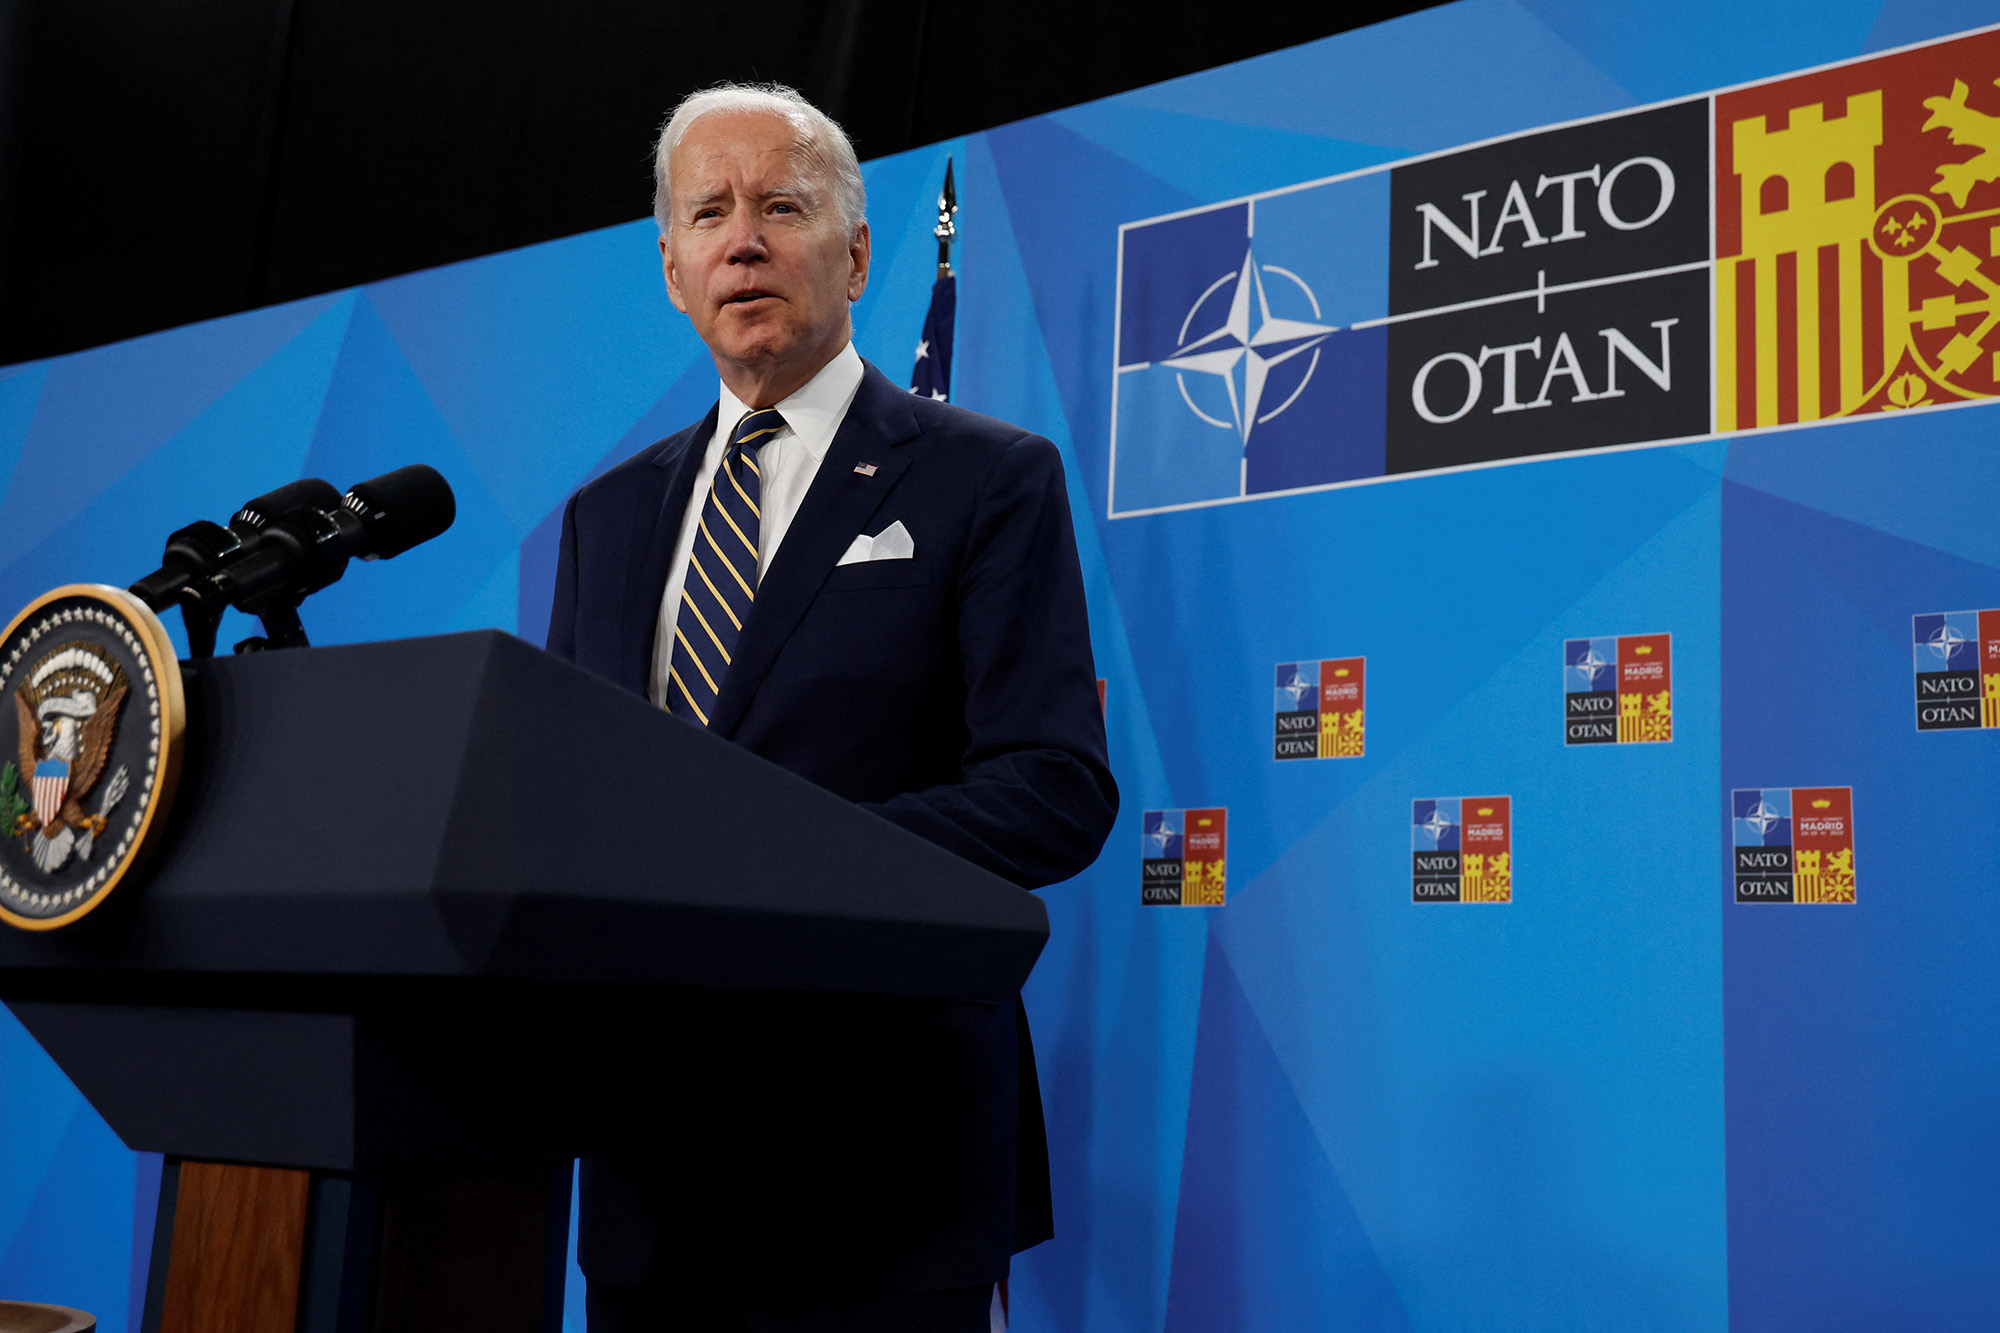 U.S. President Joe Biden holds a news conference before departing the NATO summit at the IFEMA arena in Madrid, Spain, on June 30.